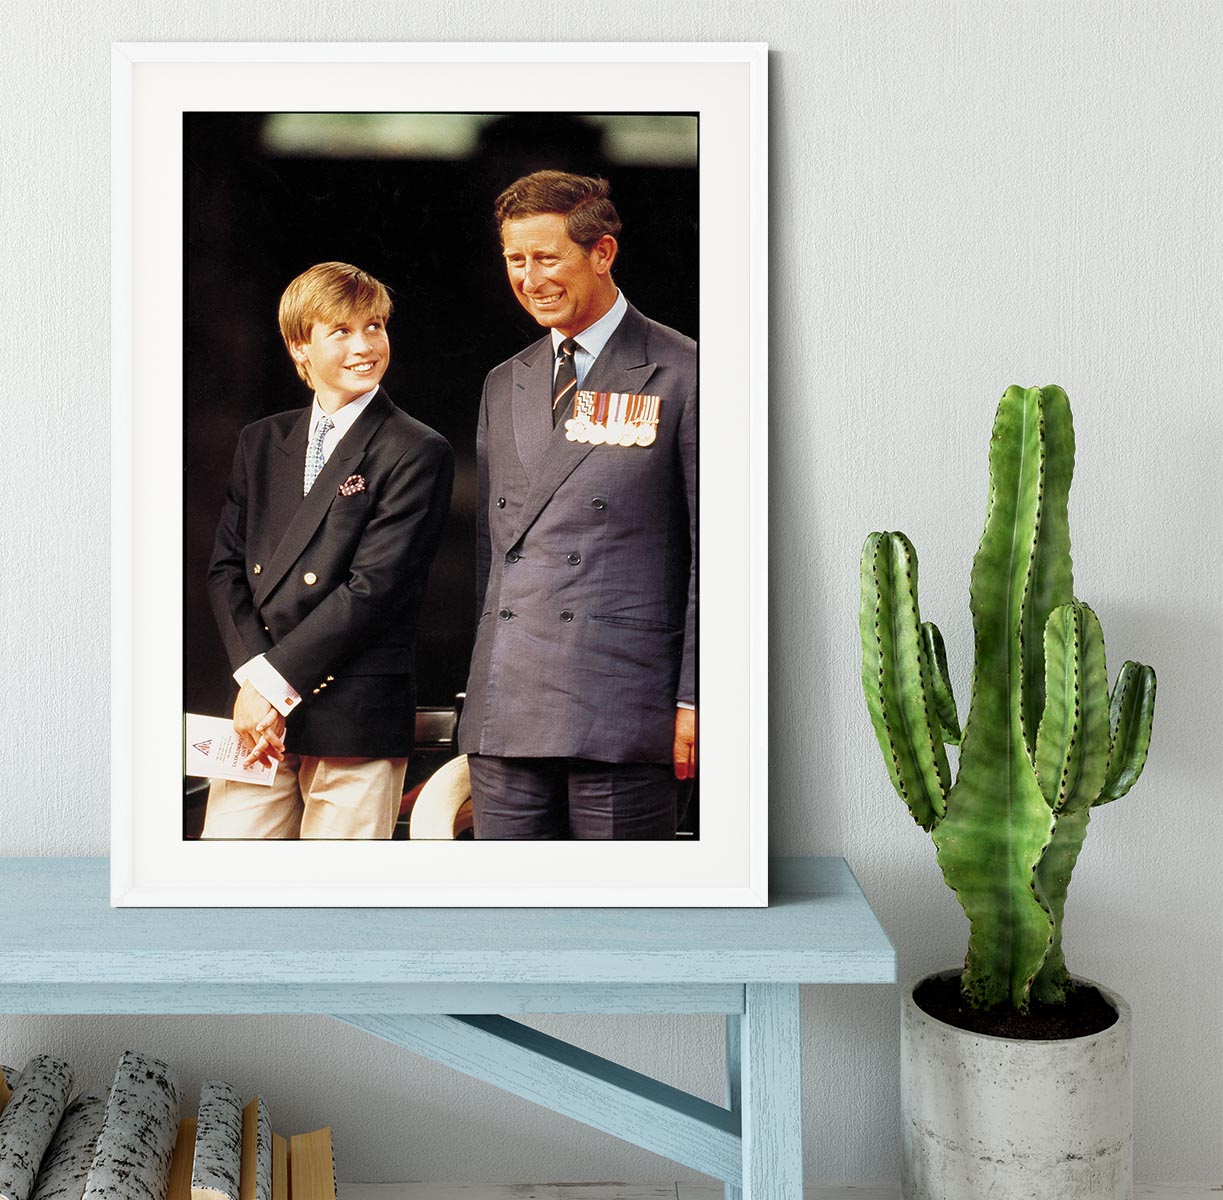 Prince William with Prince Charles at a VJ Parade Framed Print - Canvas Art Rocks - 5